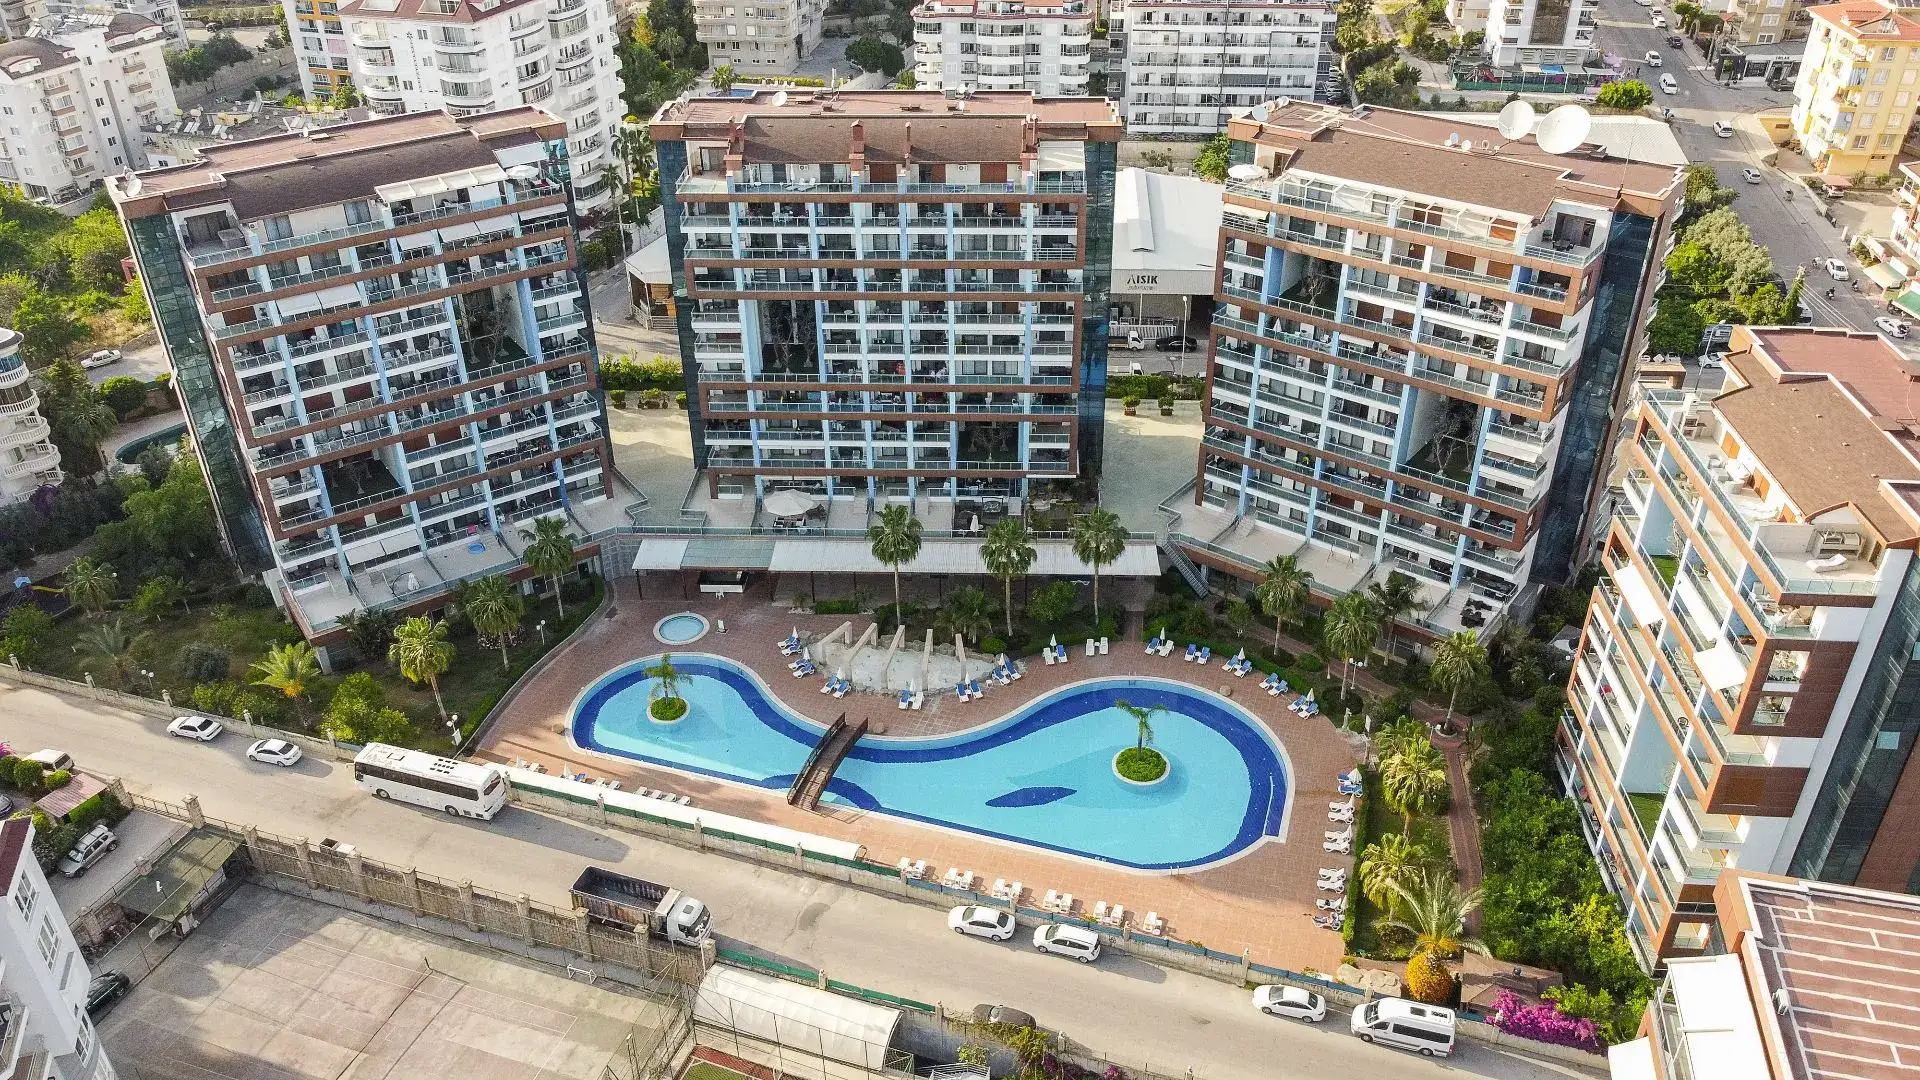 2+1 APARTMENT FOR SALE IN CİKCİİLLİ AREA - MINUTES TO THE CENTER